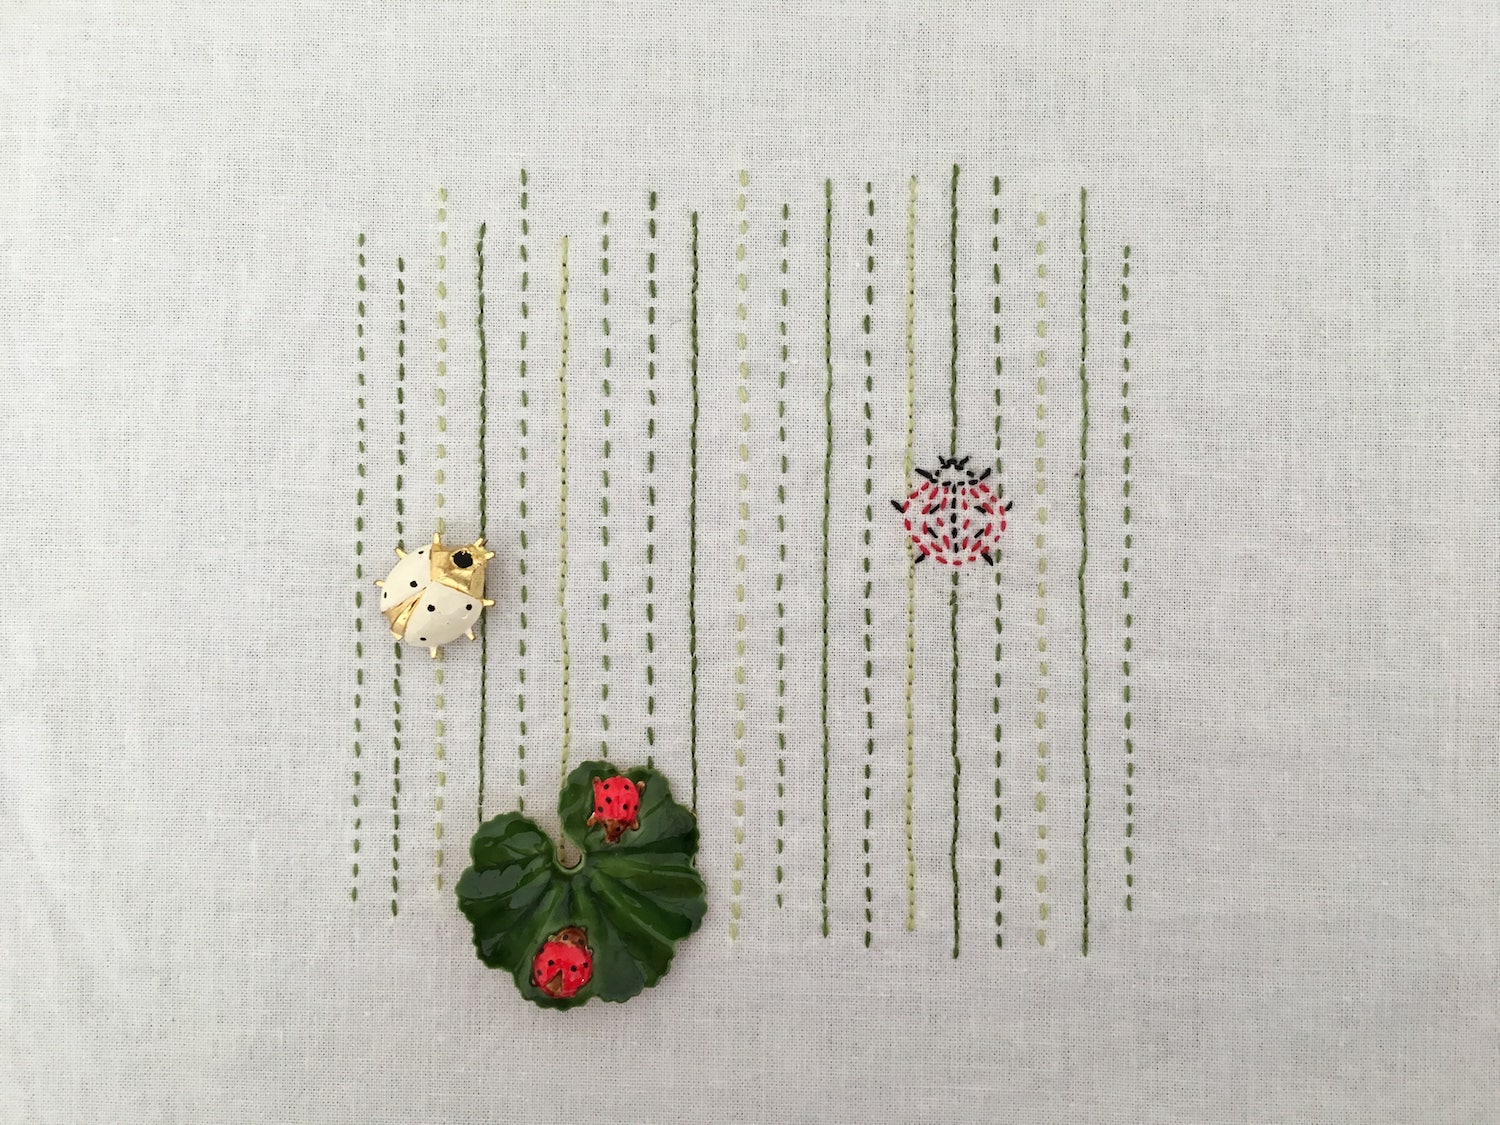 Ladybug Embroidery Project with Pins that Inspired It